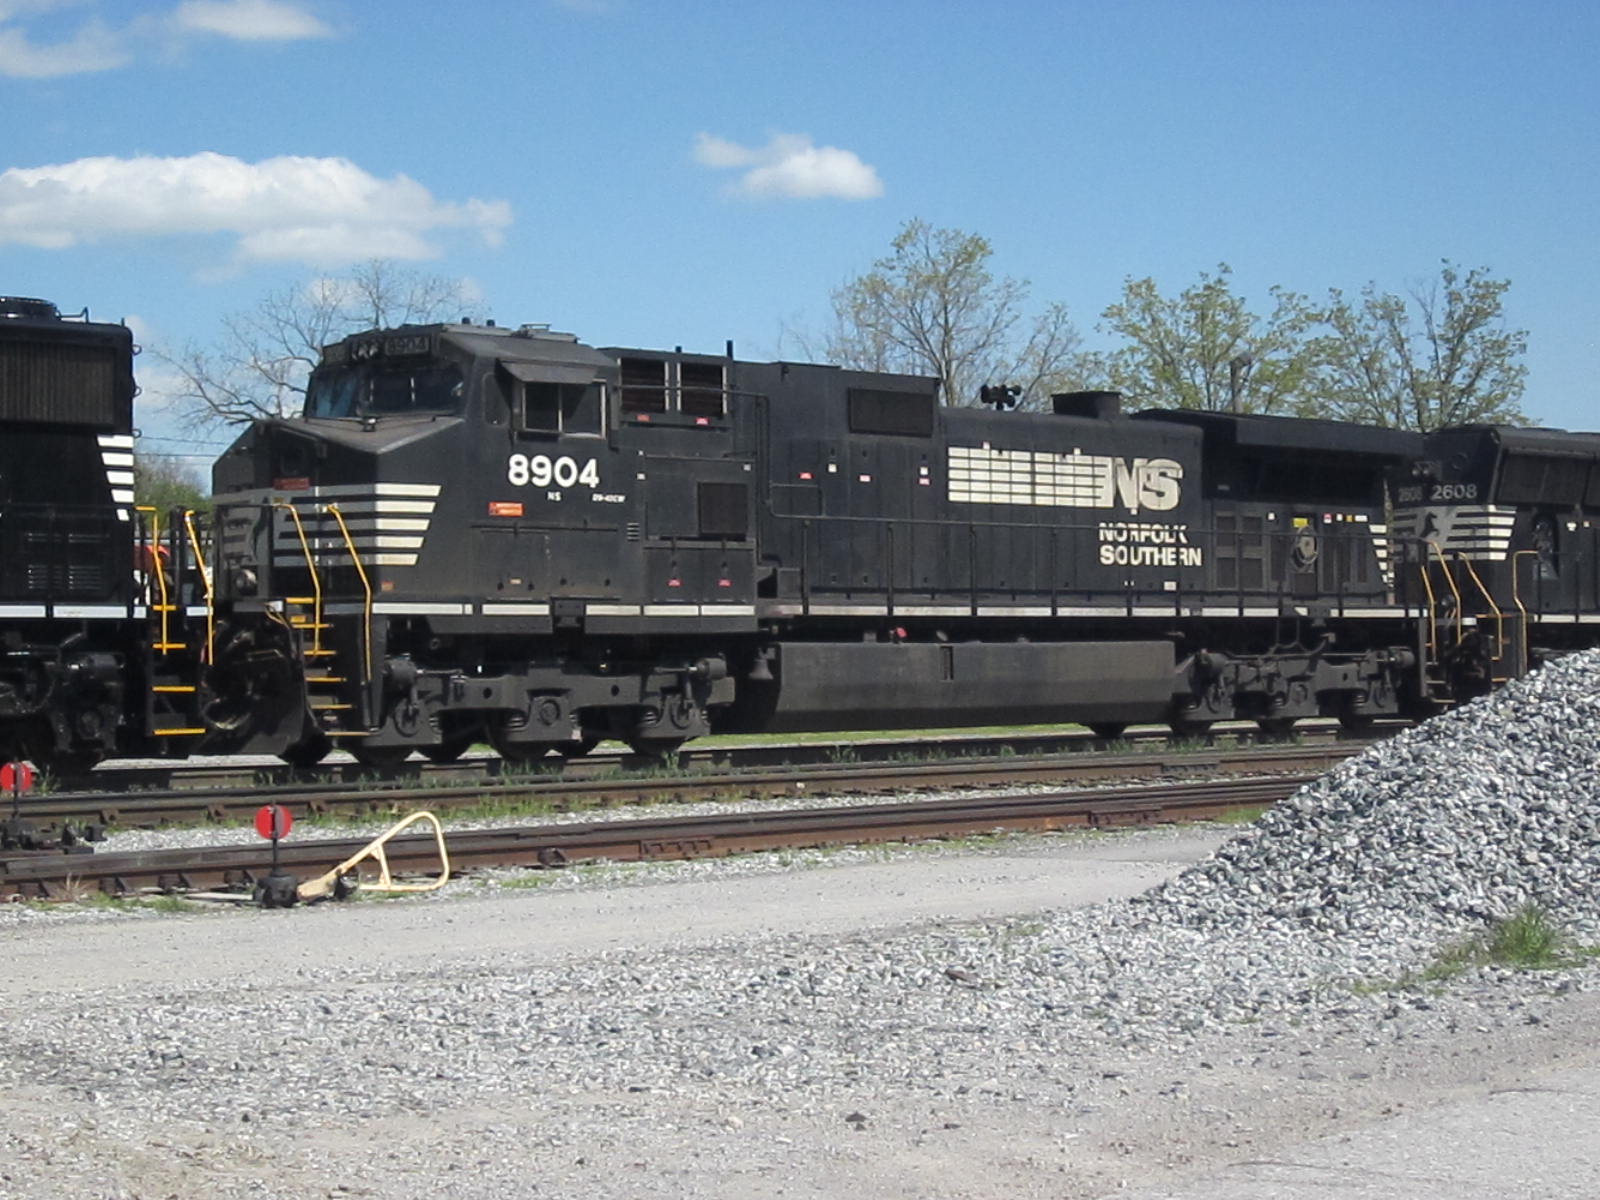 NS 8904 with 6916 and 2608 being fueled.